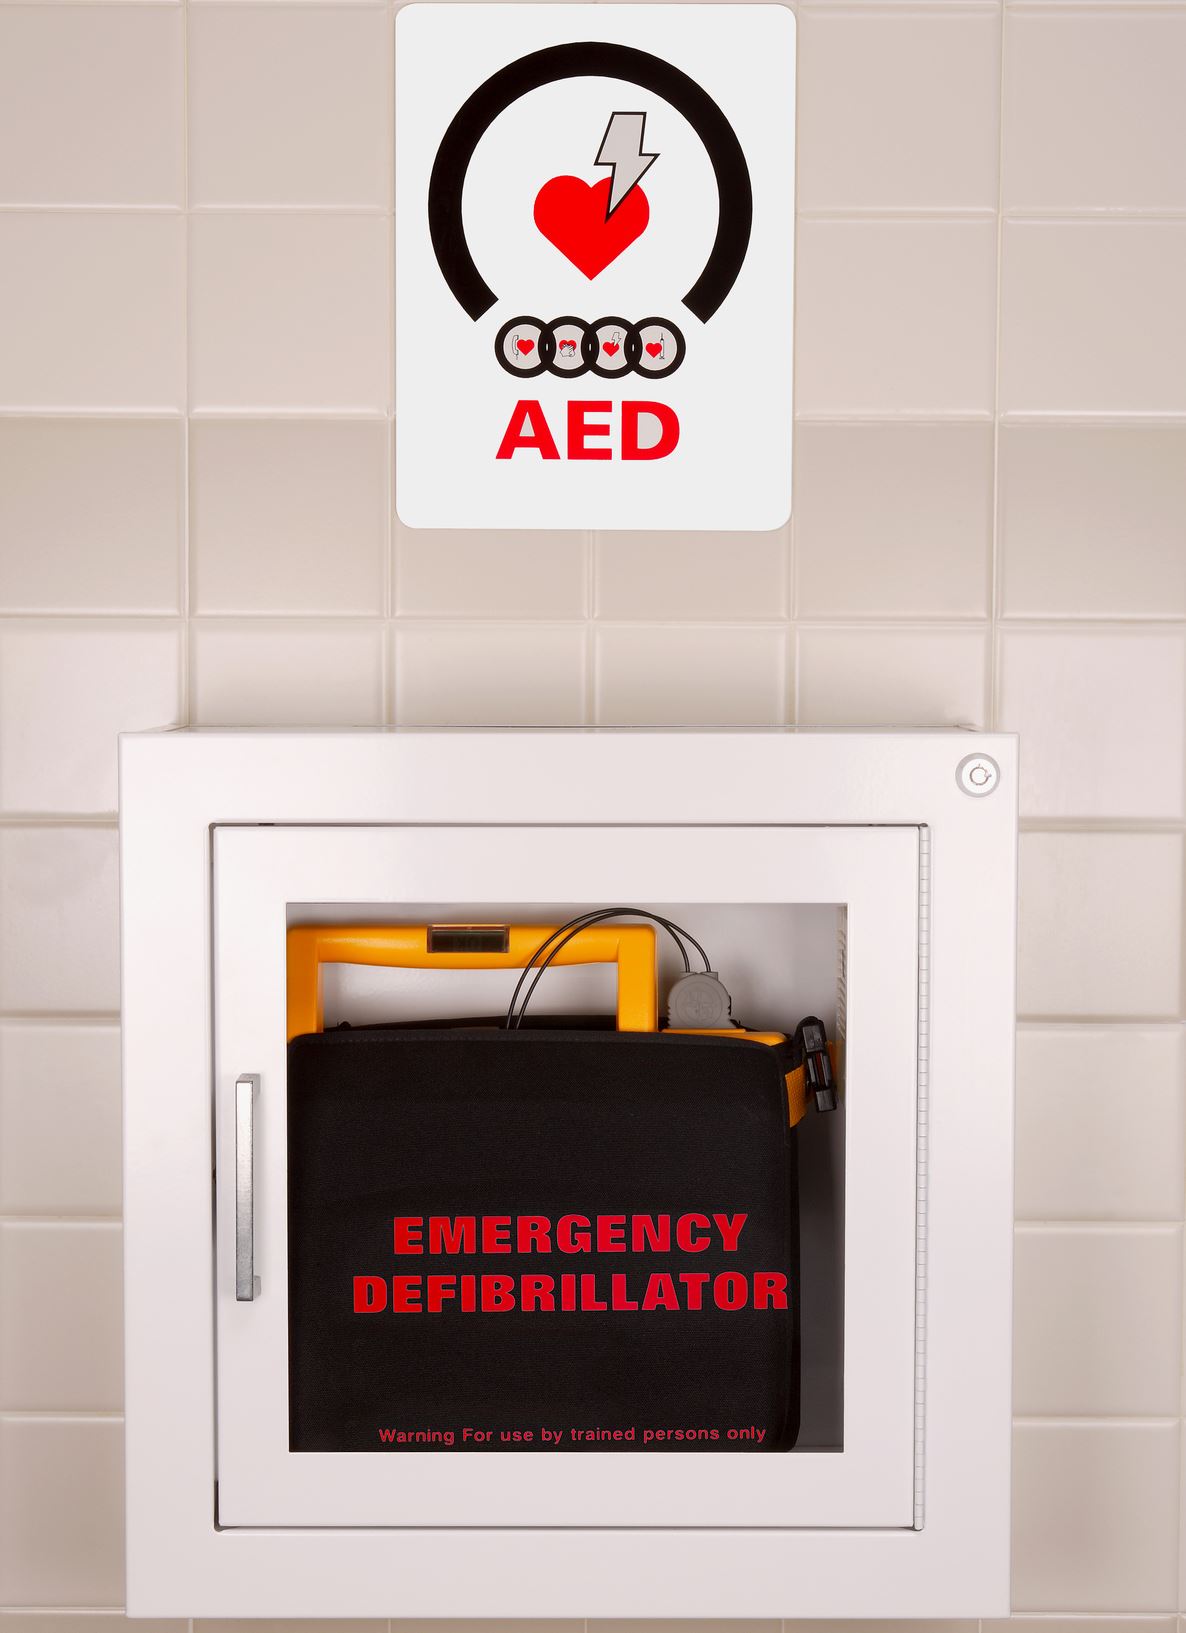 Automated external defibrillators (AEDs) can help save lives during sudden cardiac arrest.